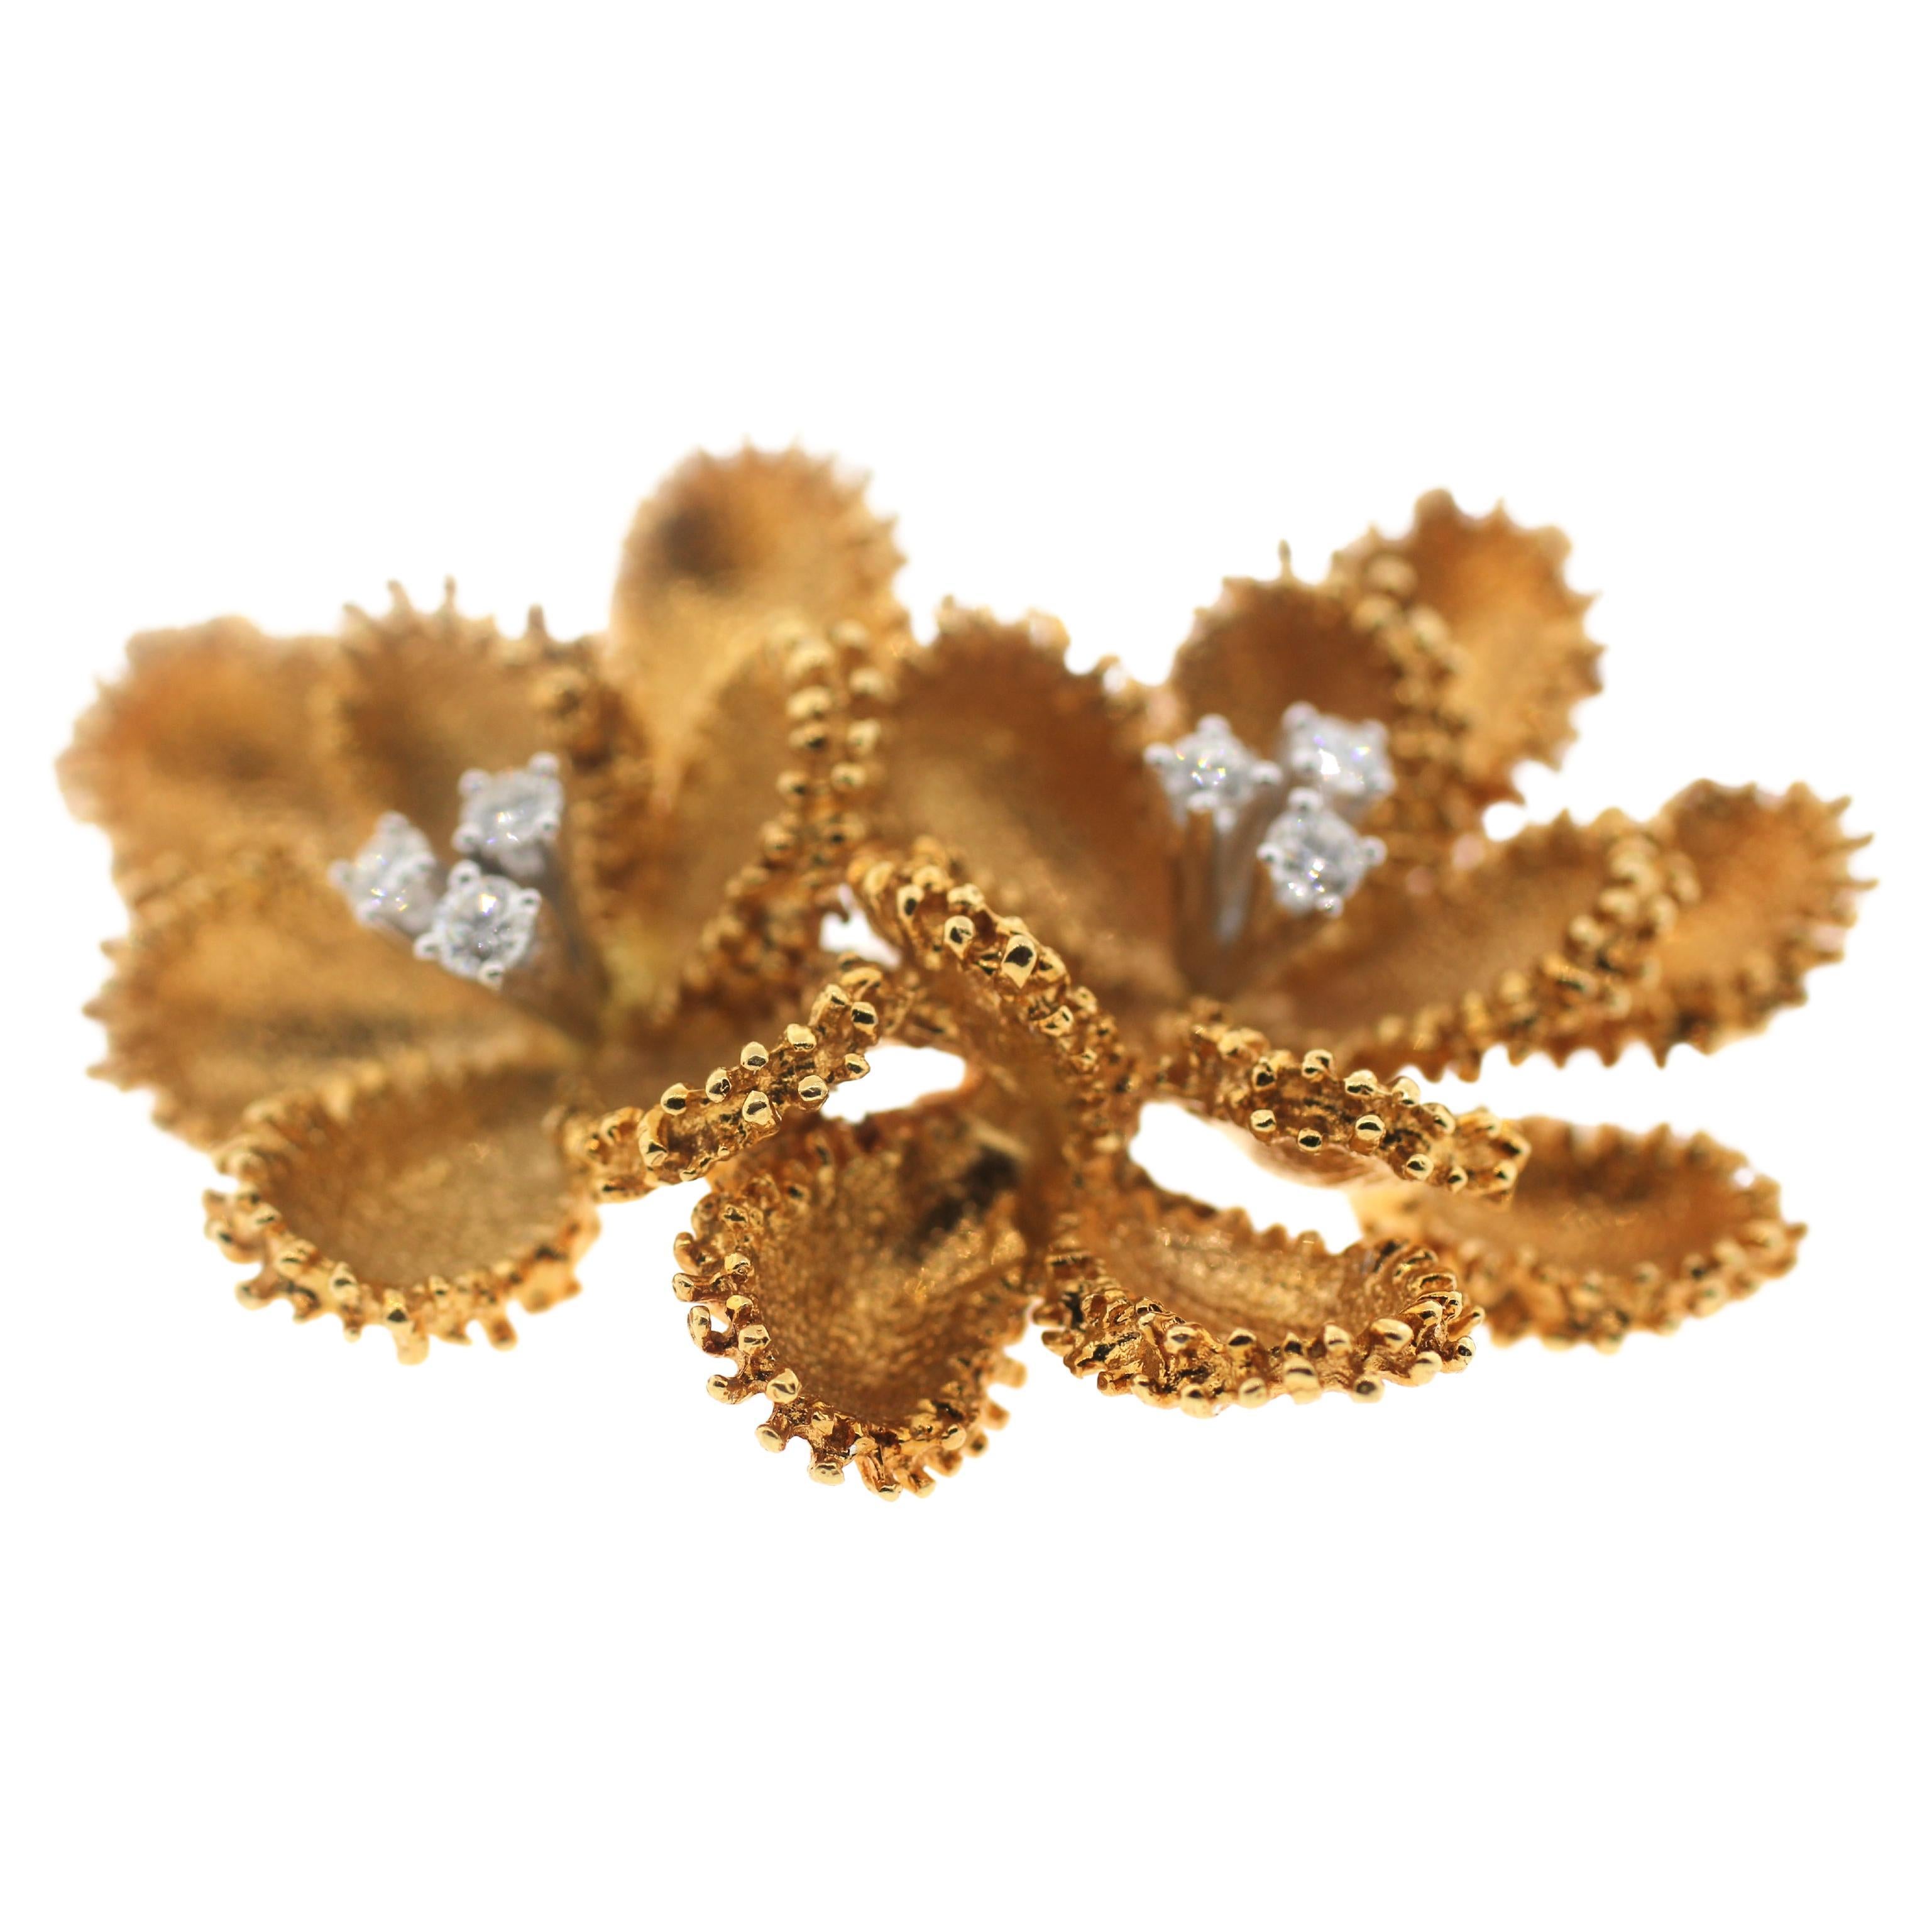 18K Yellow Gold 0.35 Carts Diamonds Textured Estate Flower Brooch
Can Convert to Pendent